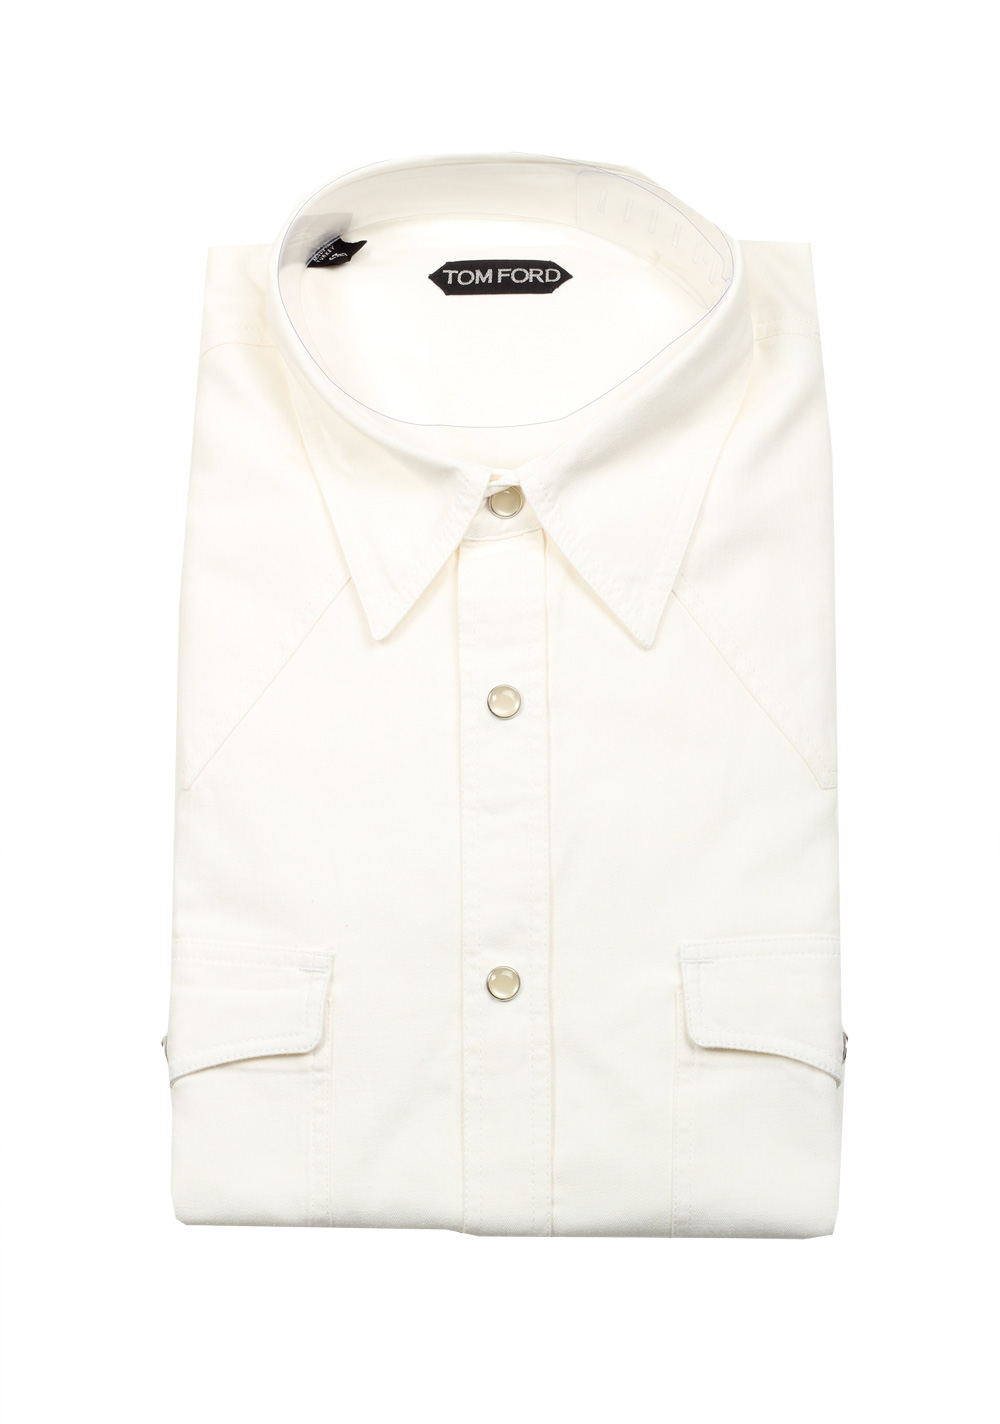 TOM FORD Solid White Casual Shirt Size 43 / 17 U.S. | Costume Limité